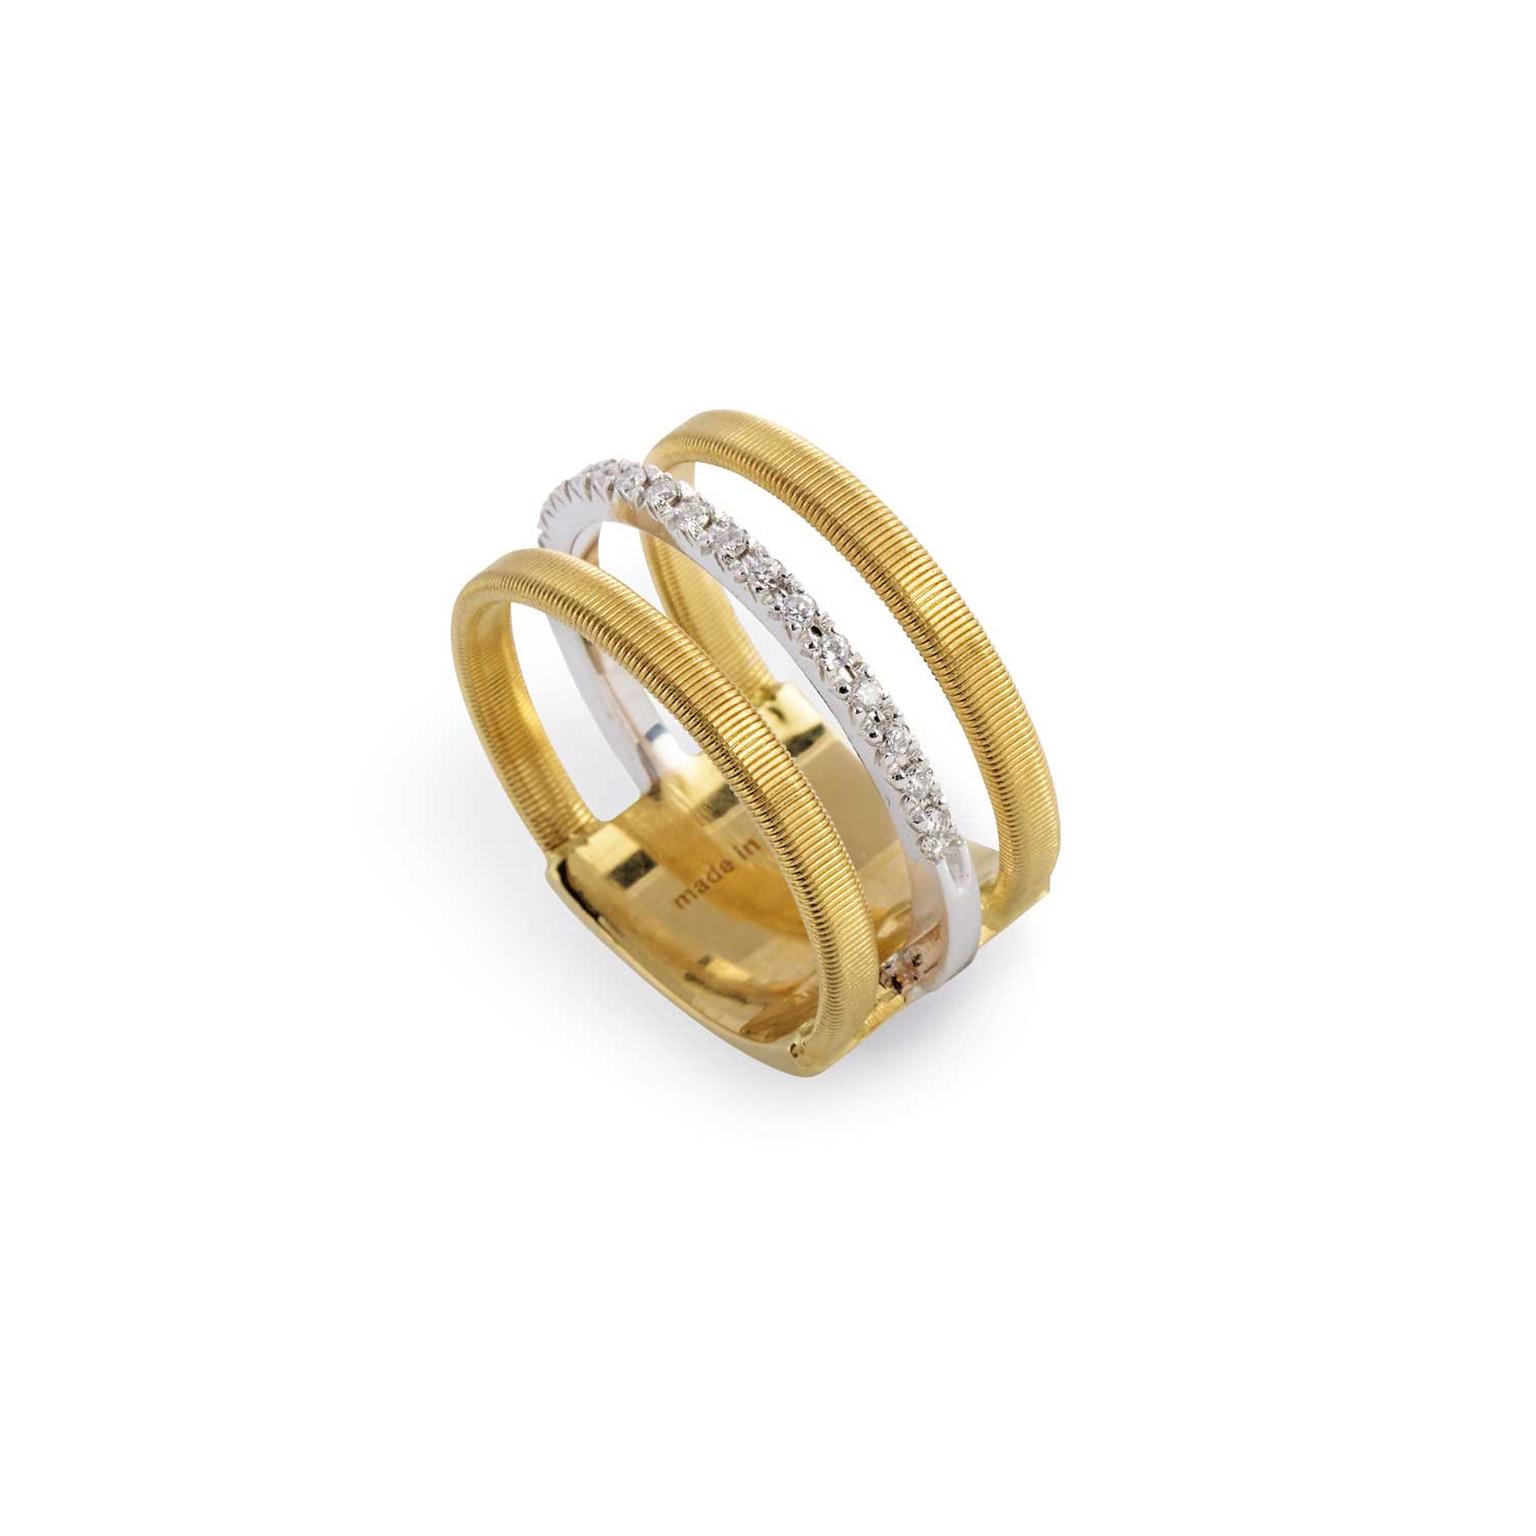 Marco Bicego Masai three row ring in yellow and white gold with brilliant-cut diamonds